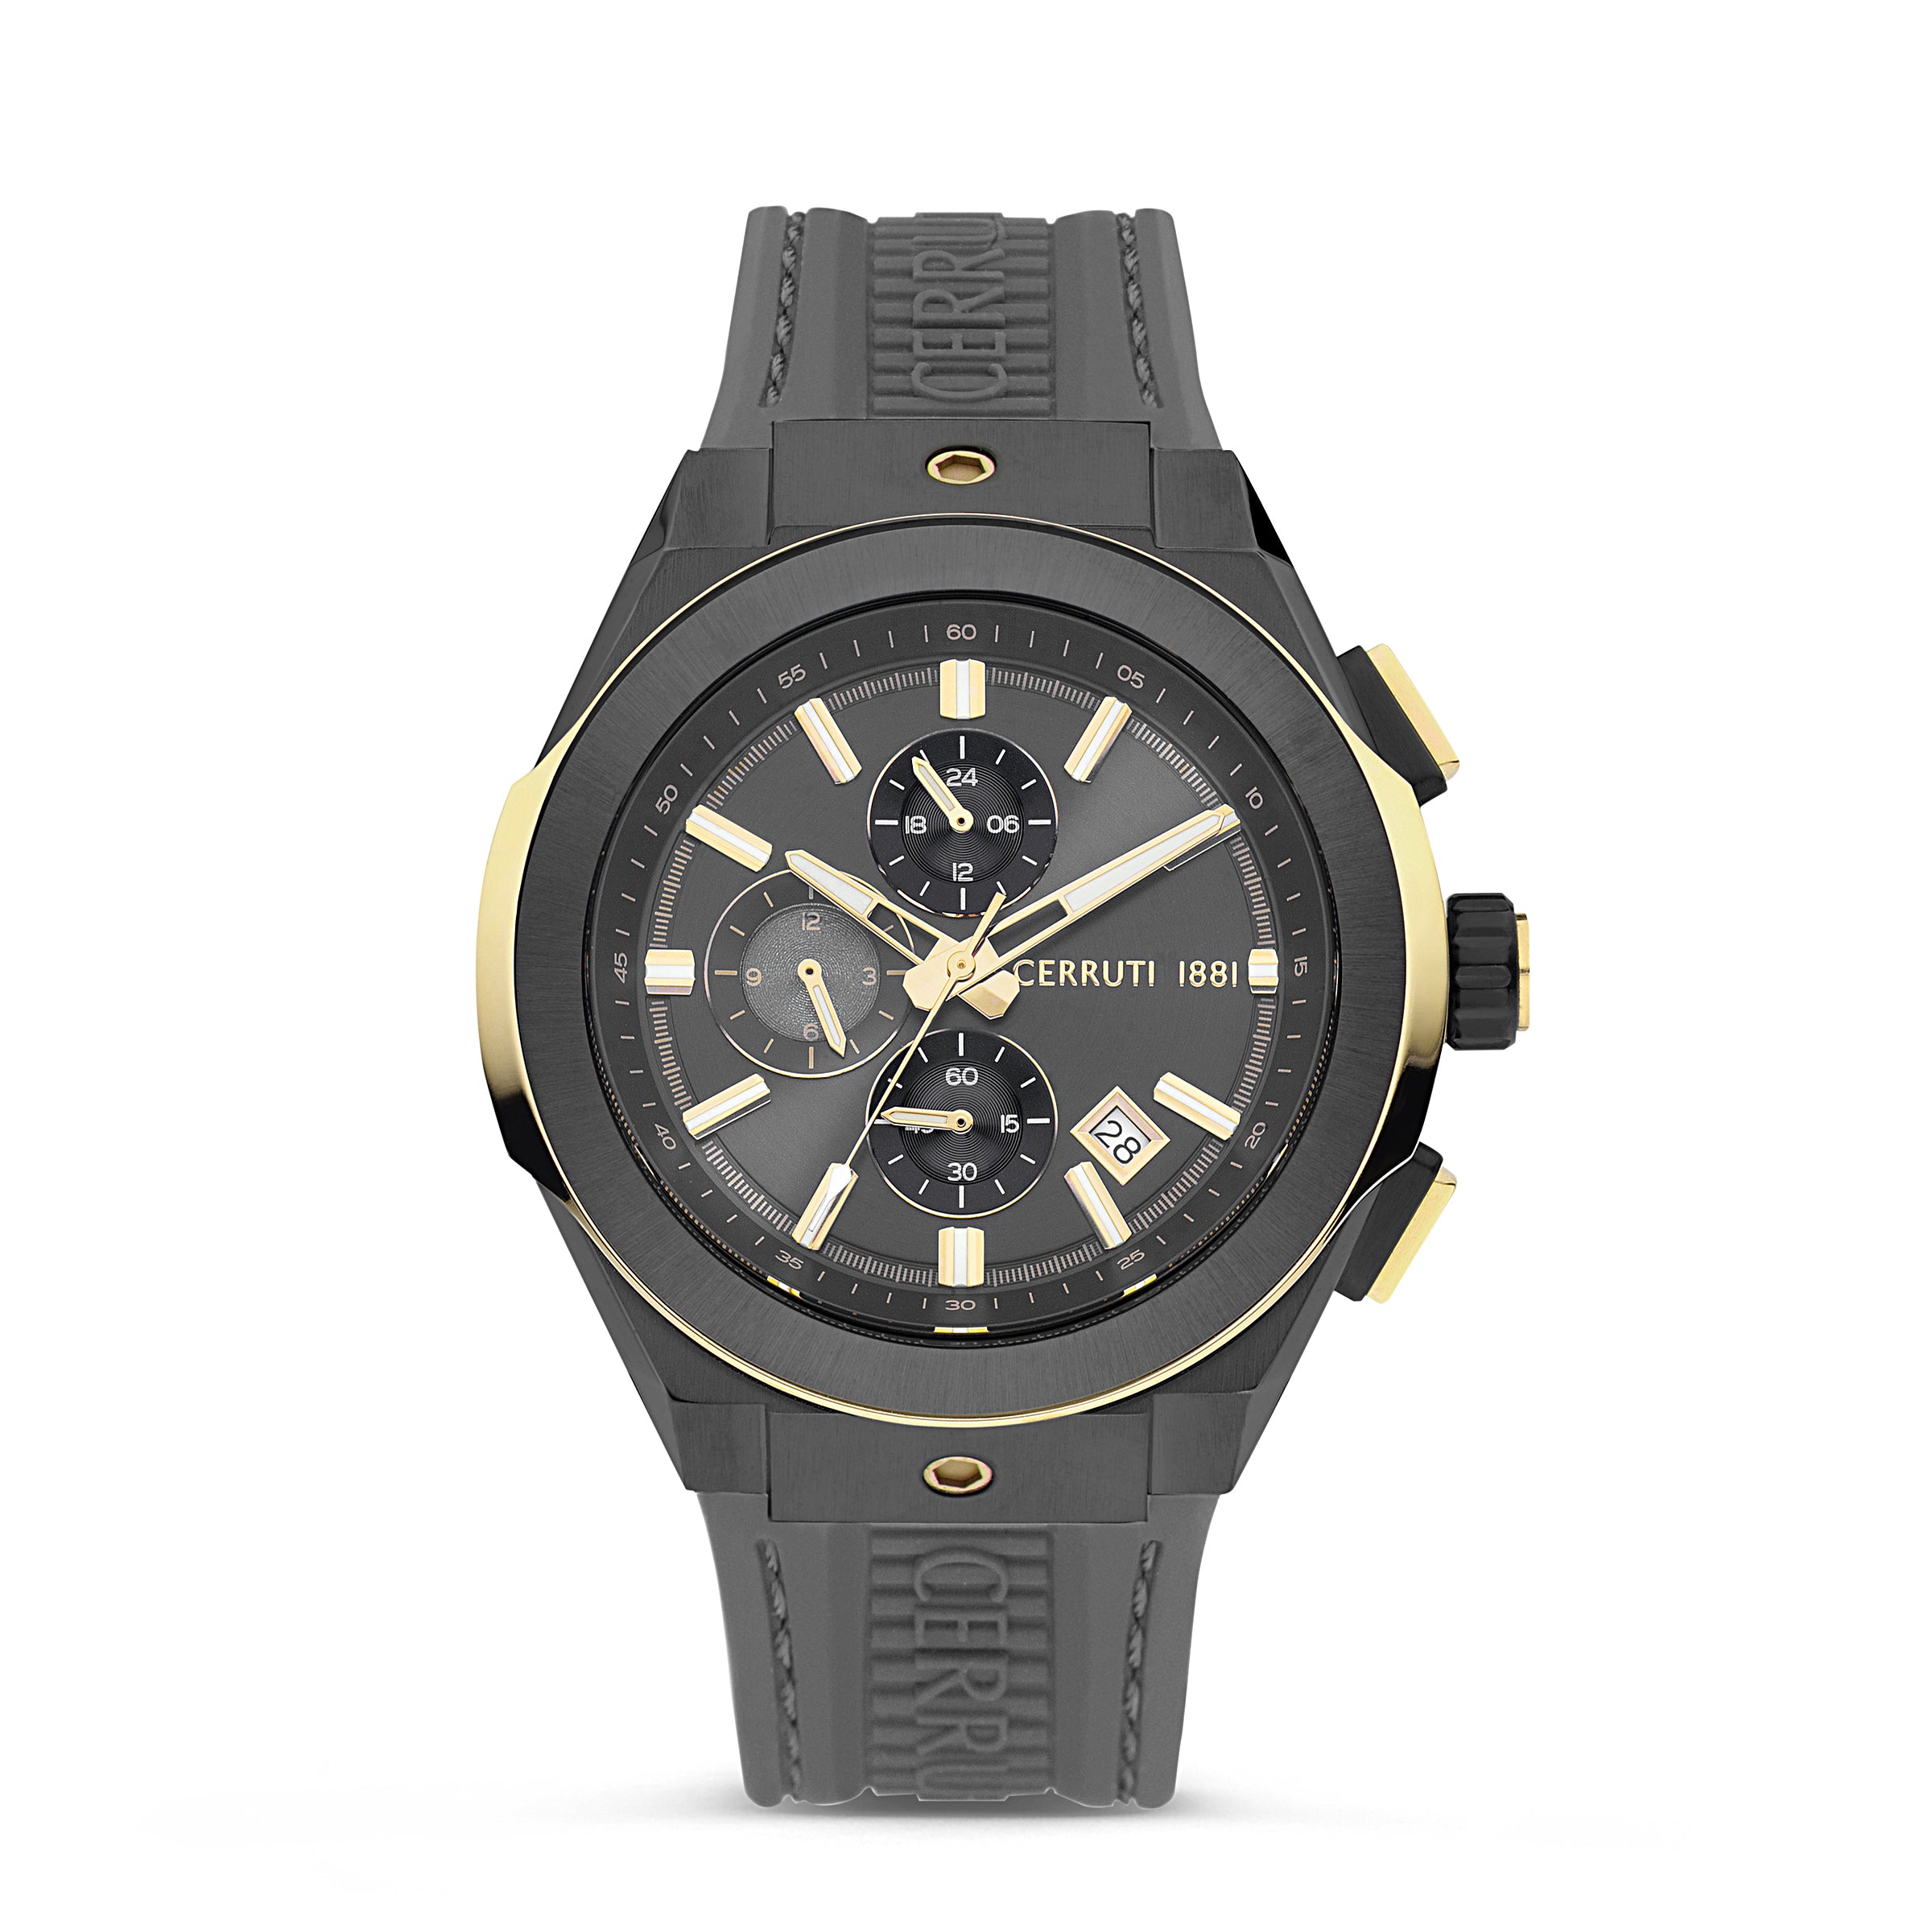 Cerruti 1881 CIWGR0007101 Lucardo Contemporary Automatic... for $480 for  sale from a Trusted Seller on Chrono24